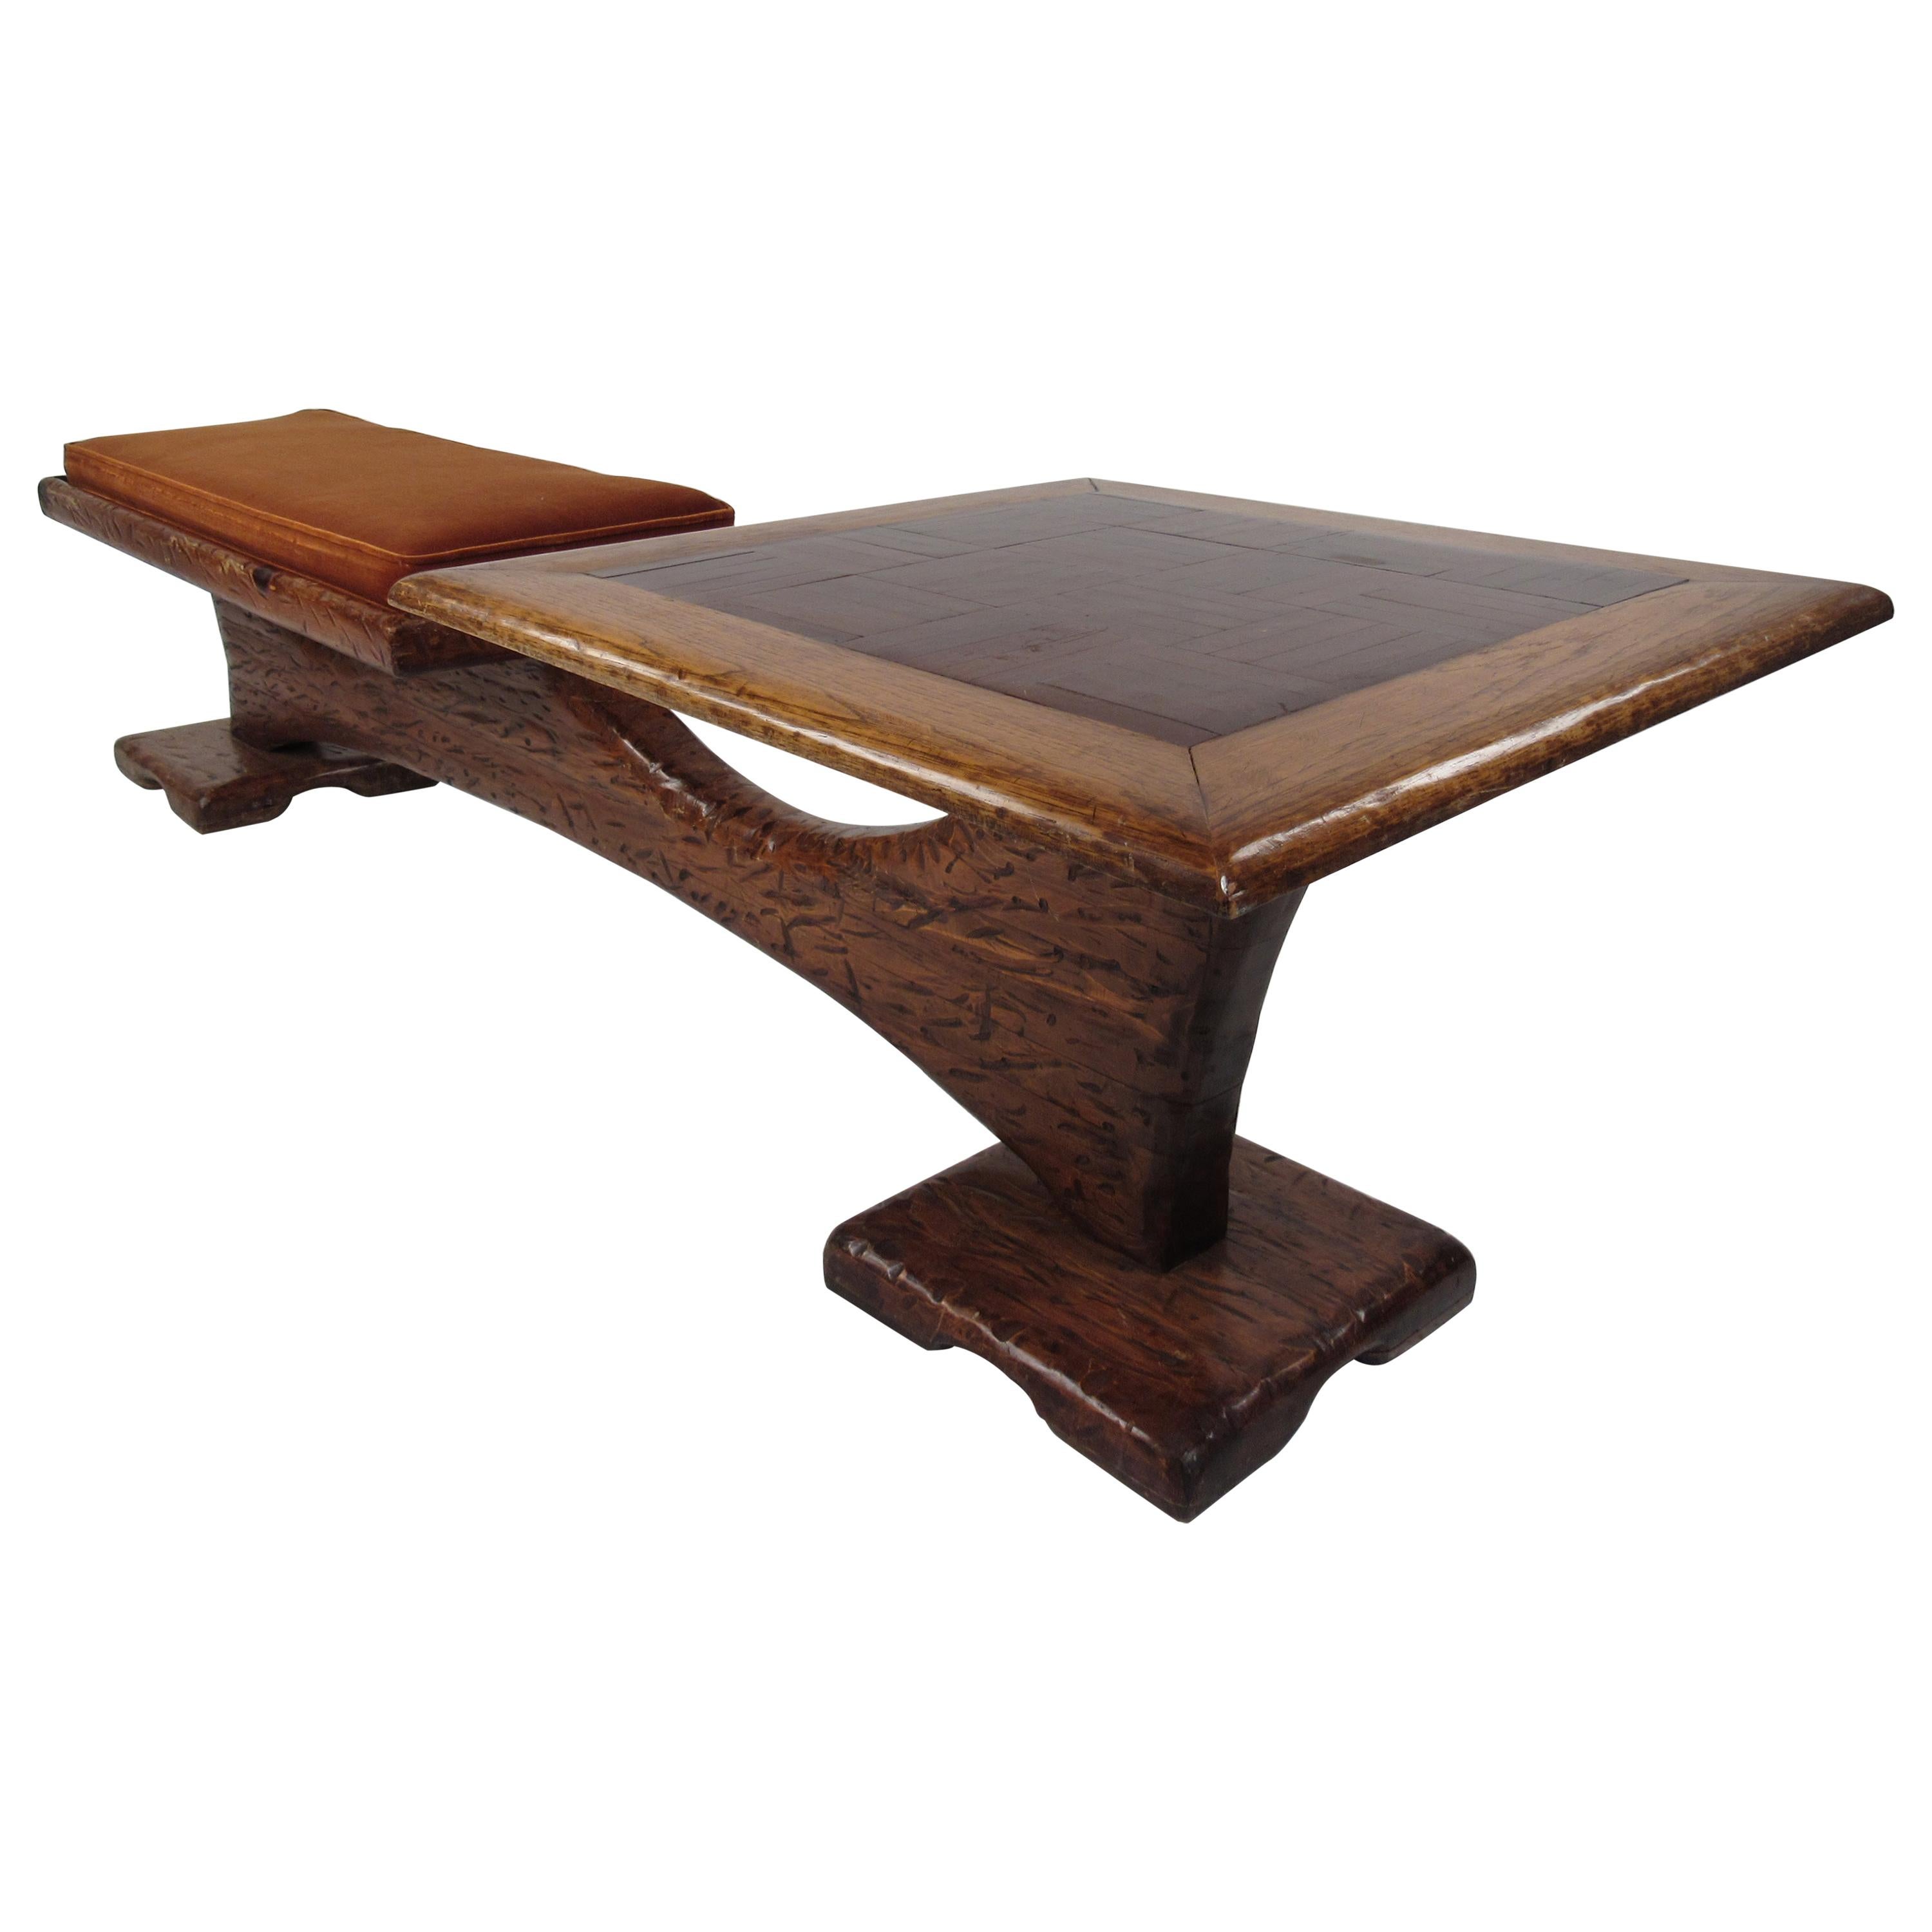 This amazing vintage modern piece combines seating and a table all in one. A one of a kind two-tone Witco style piece that is made with carved wood. A thick cushion rests on a sturdy pedestal style base that connects each side with a sculpted